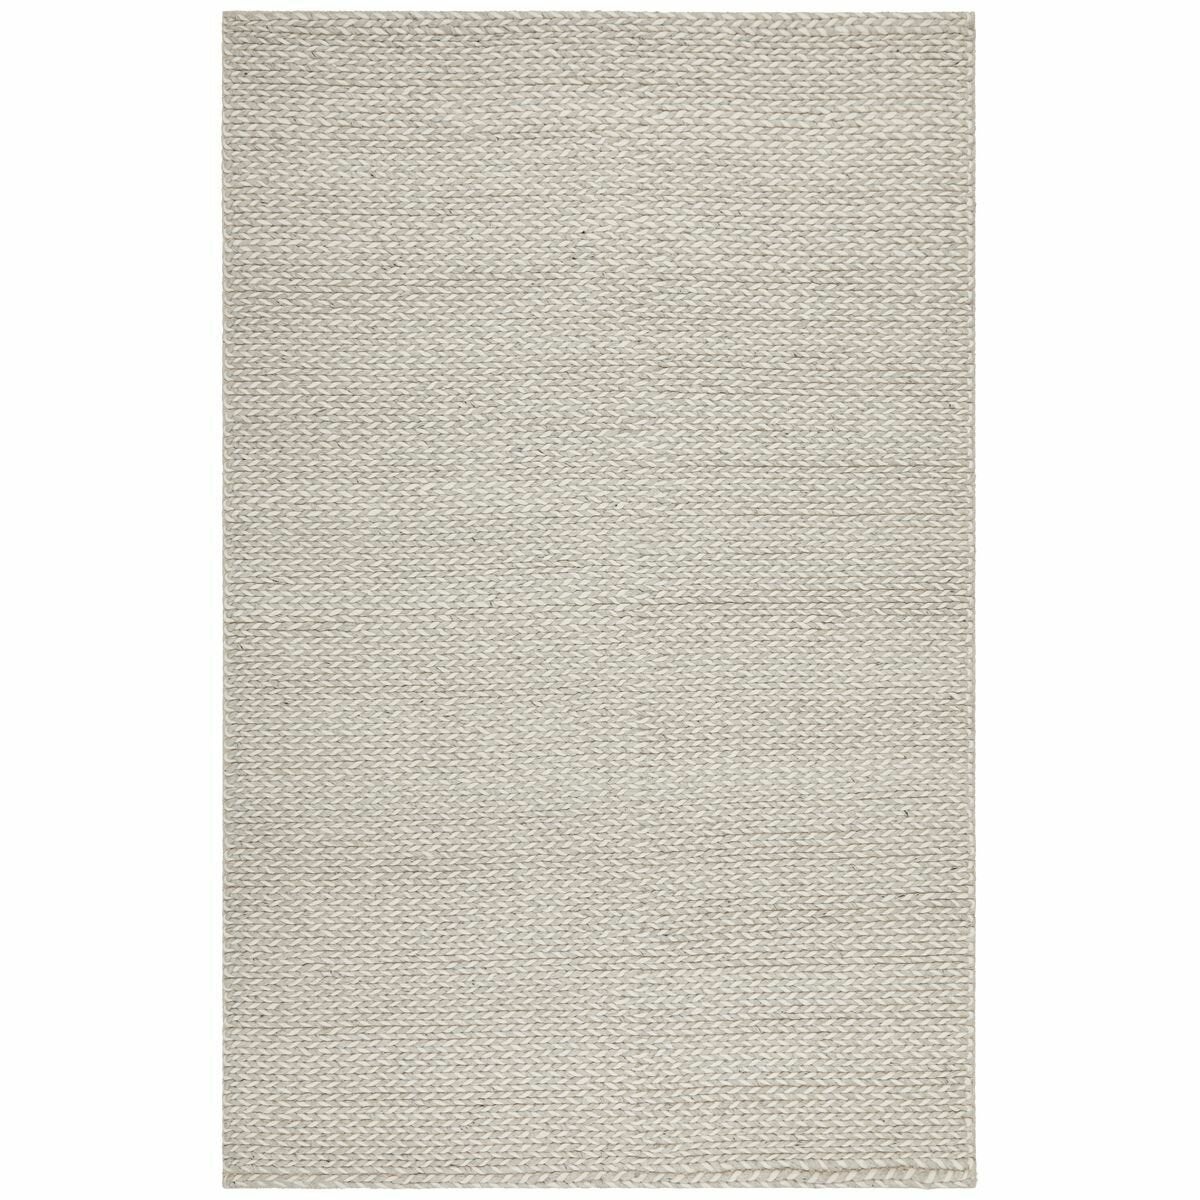 Image of Rug Culture Helena Woven Wool Rug Grey White 225x155cm STUD-321-SIL-225155